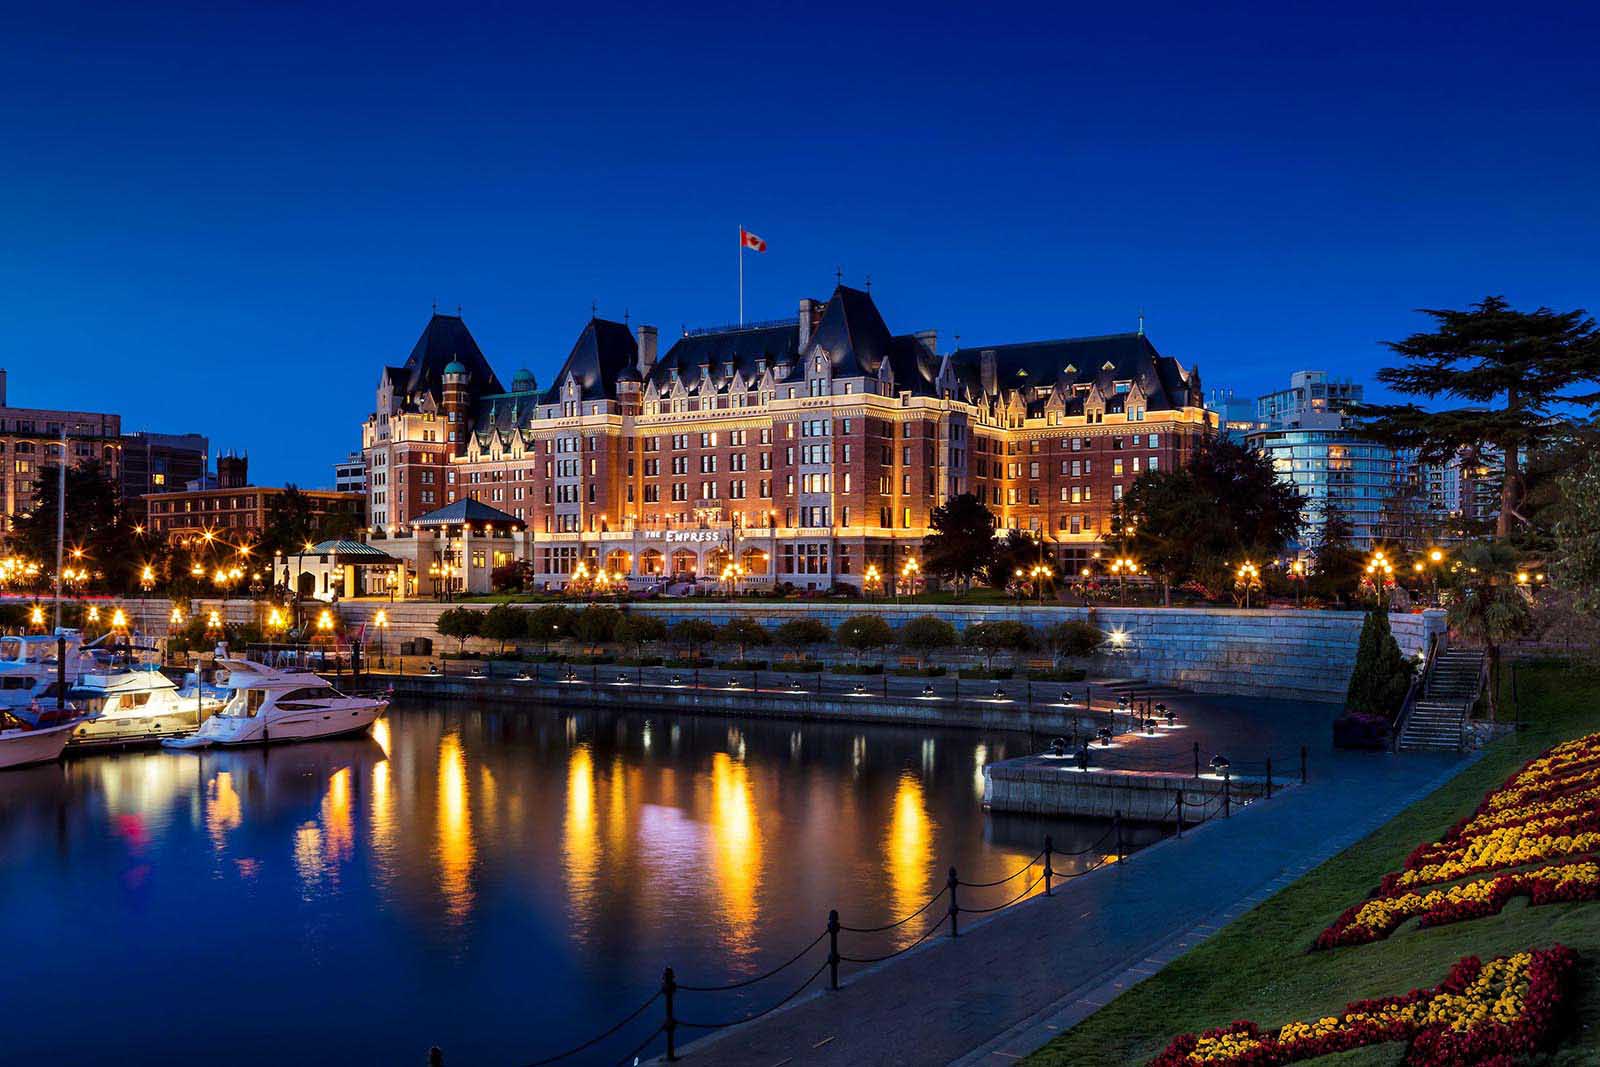 The Empress, Victoria, British Columbia | Canada's stately chateaux